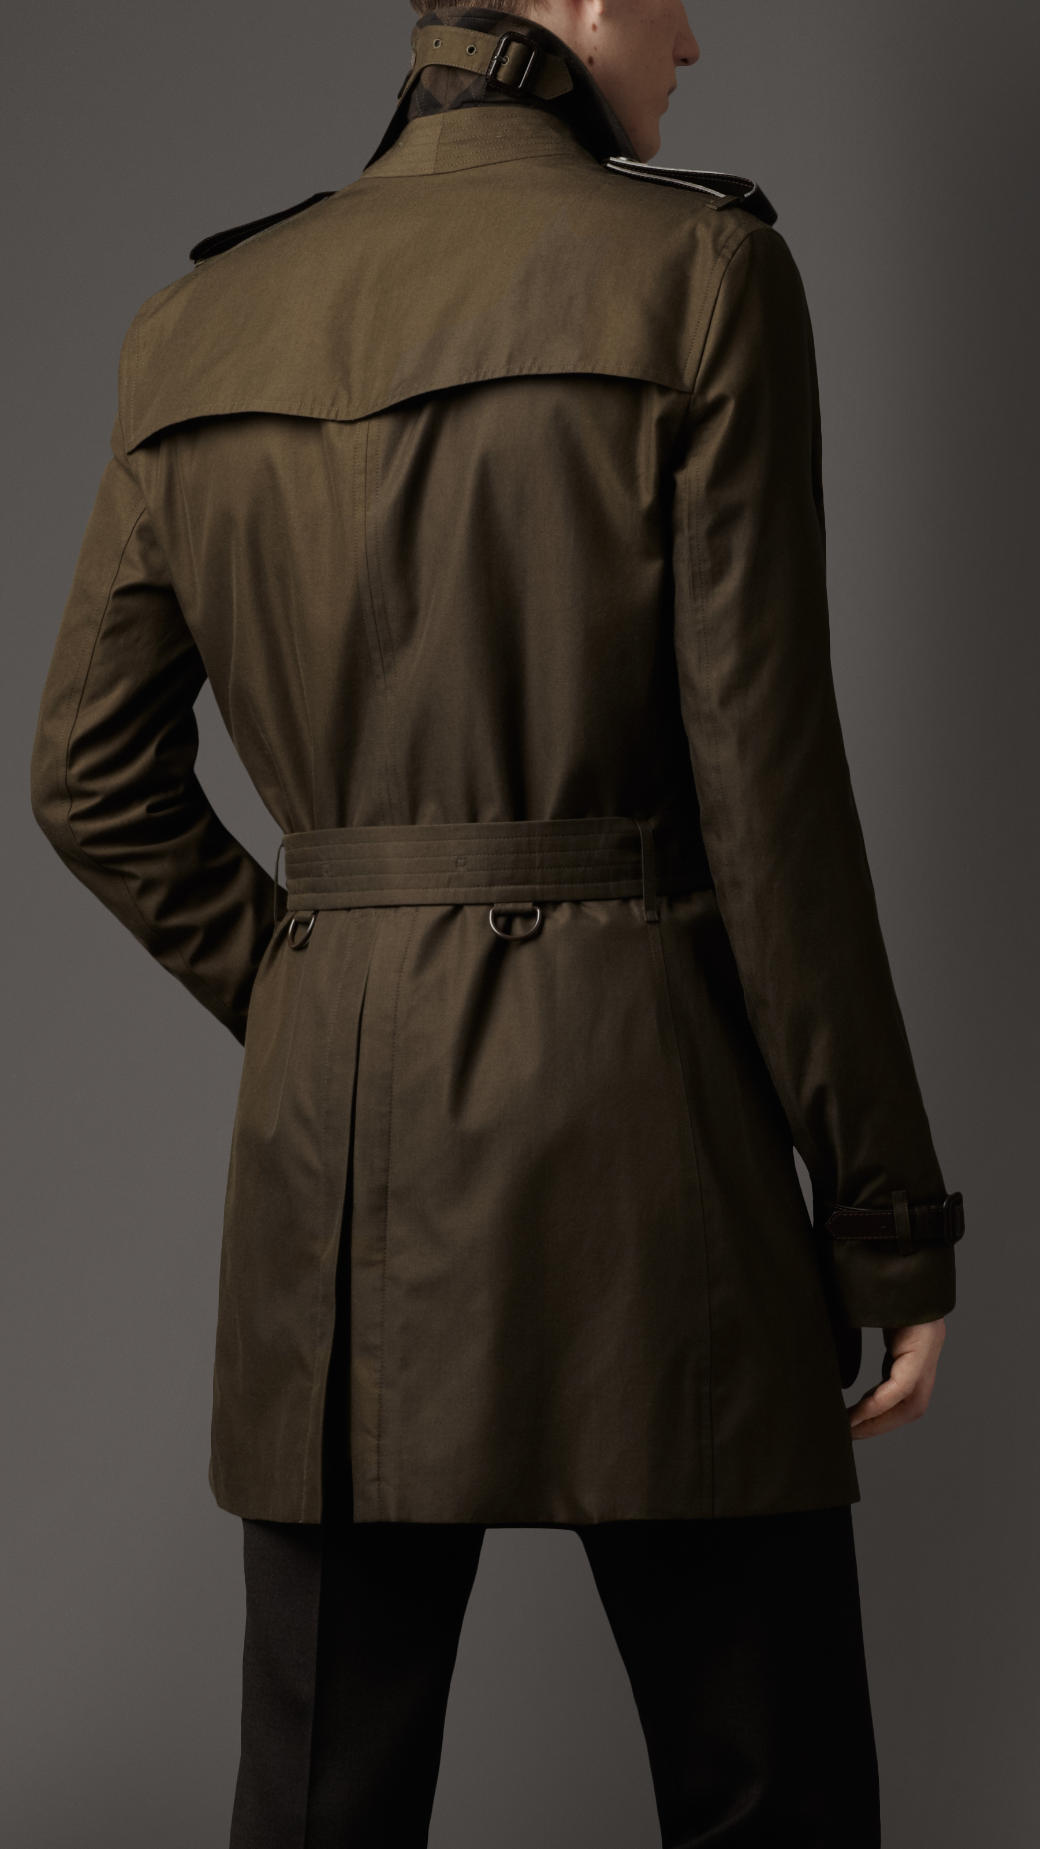 Lyst - Burberry Midlength Leather Trim Gabardine Trench Coat in Natural ...